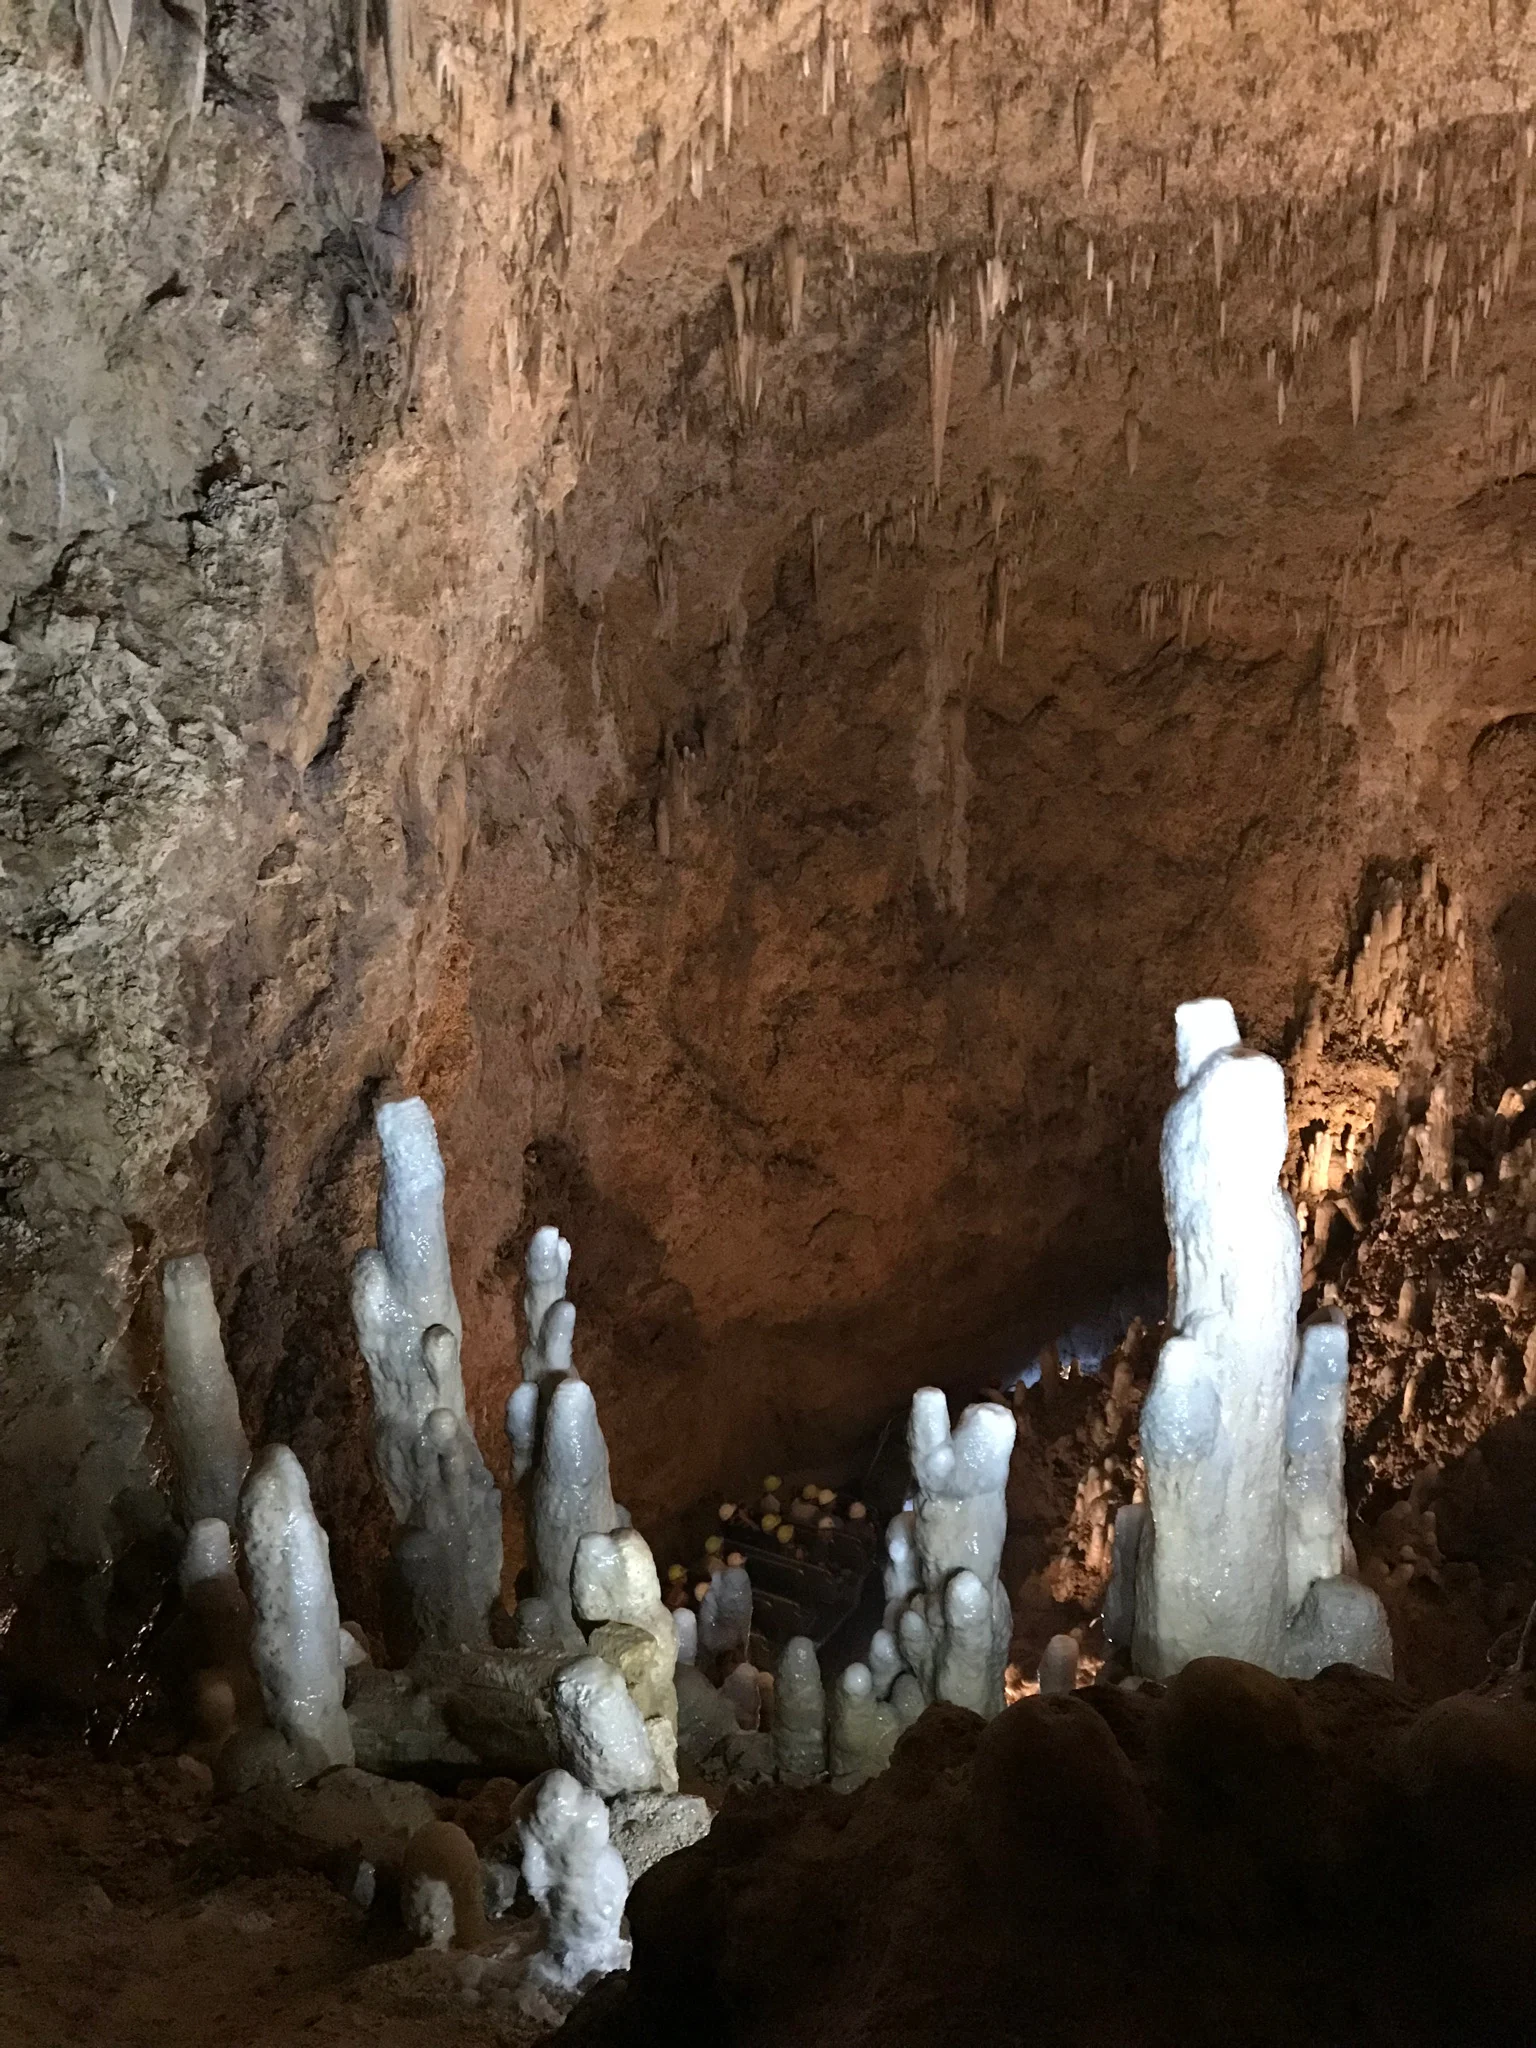 Great experience in Barbados with kids at Harrisons Cave - check out our other ideas on the site. #barbados #caribbean #travel